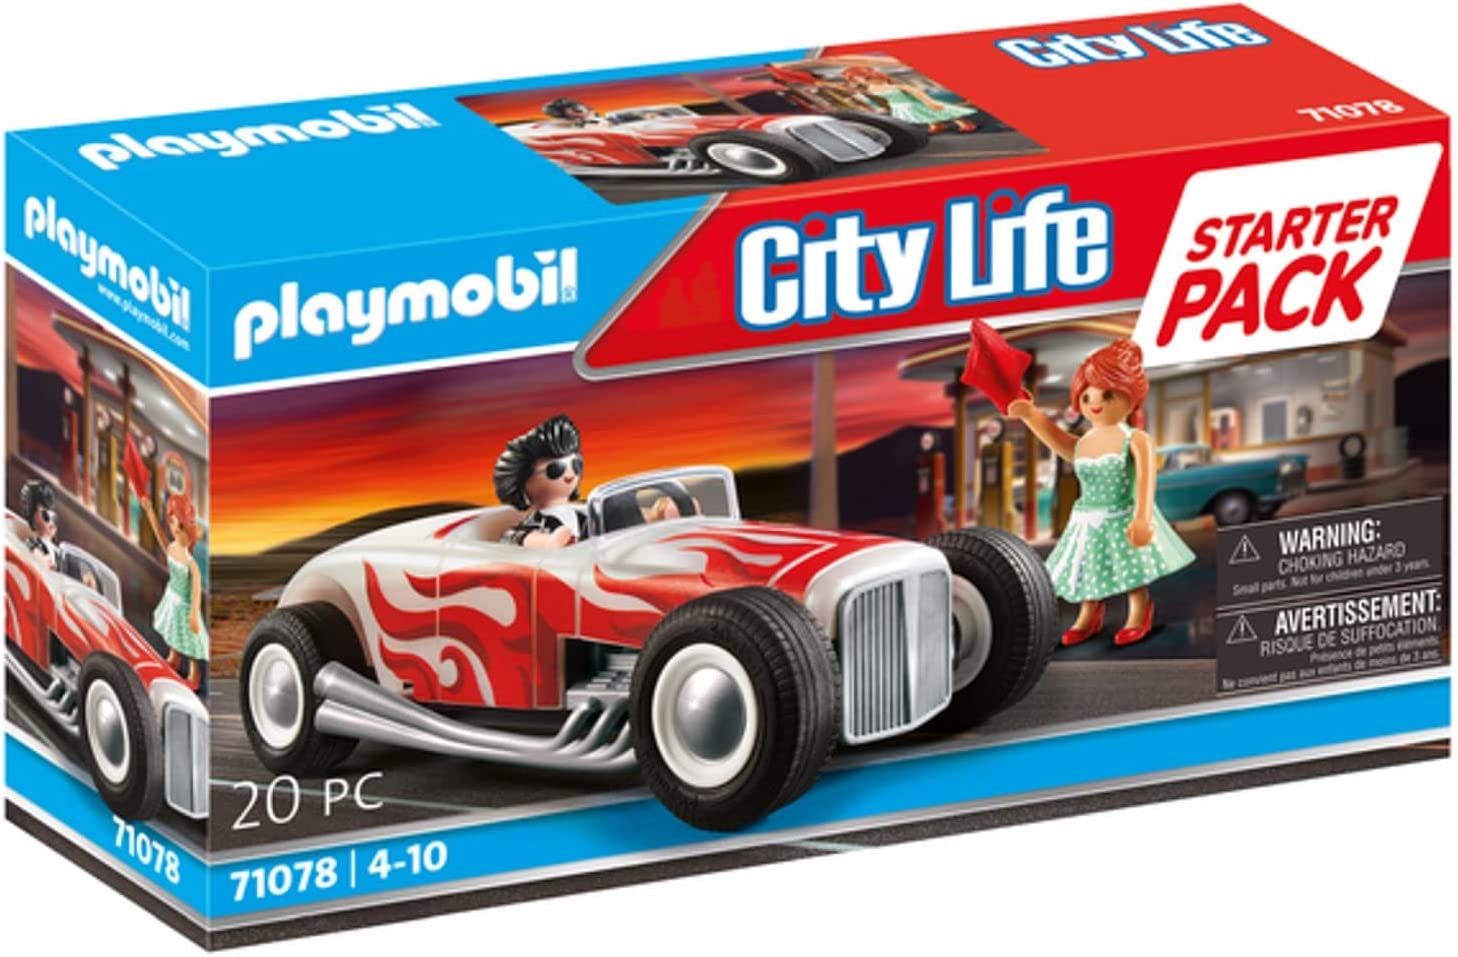 PLAYMOBIL City Life 71078 Starter Pack Hot Rod Toy Car in 50s Style, First Toy for Children from 4 Years